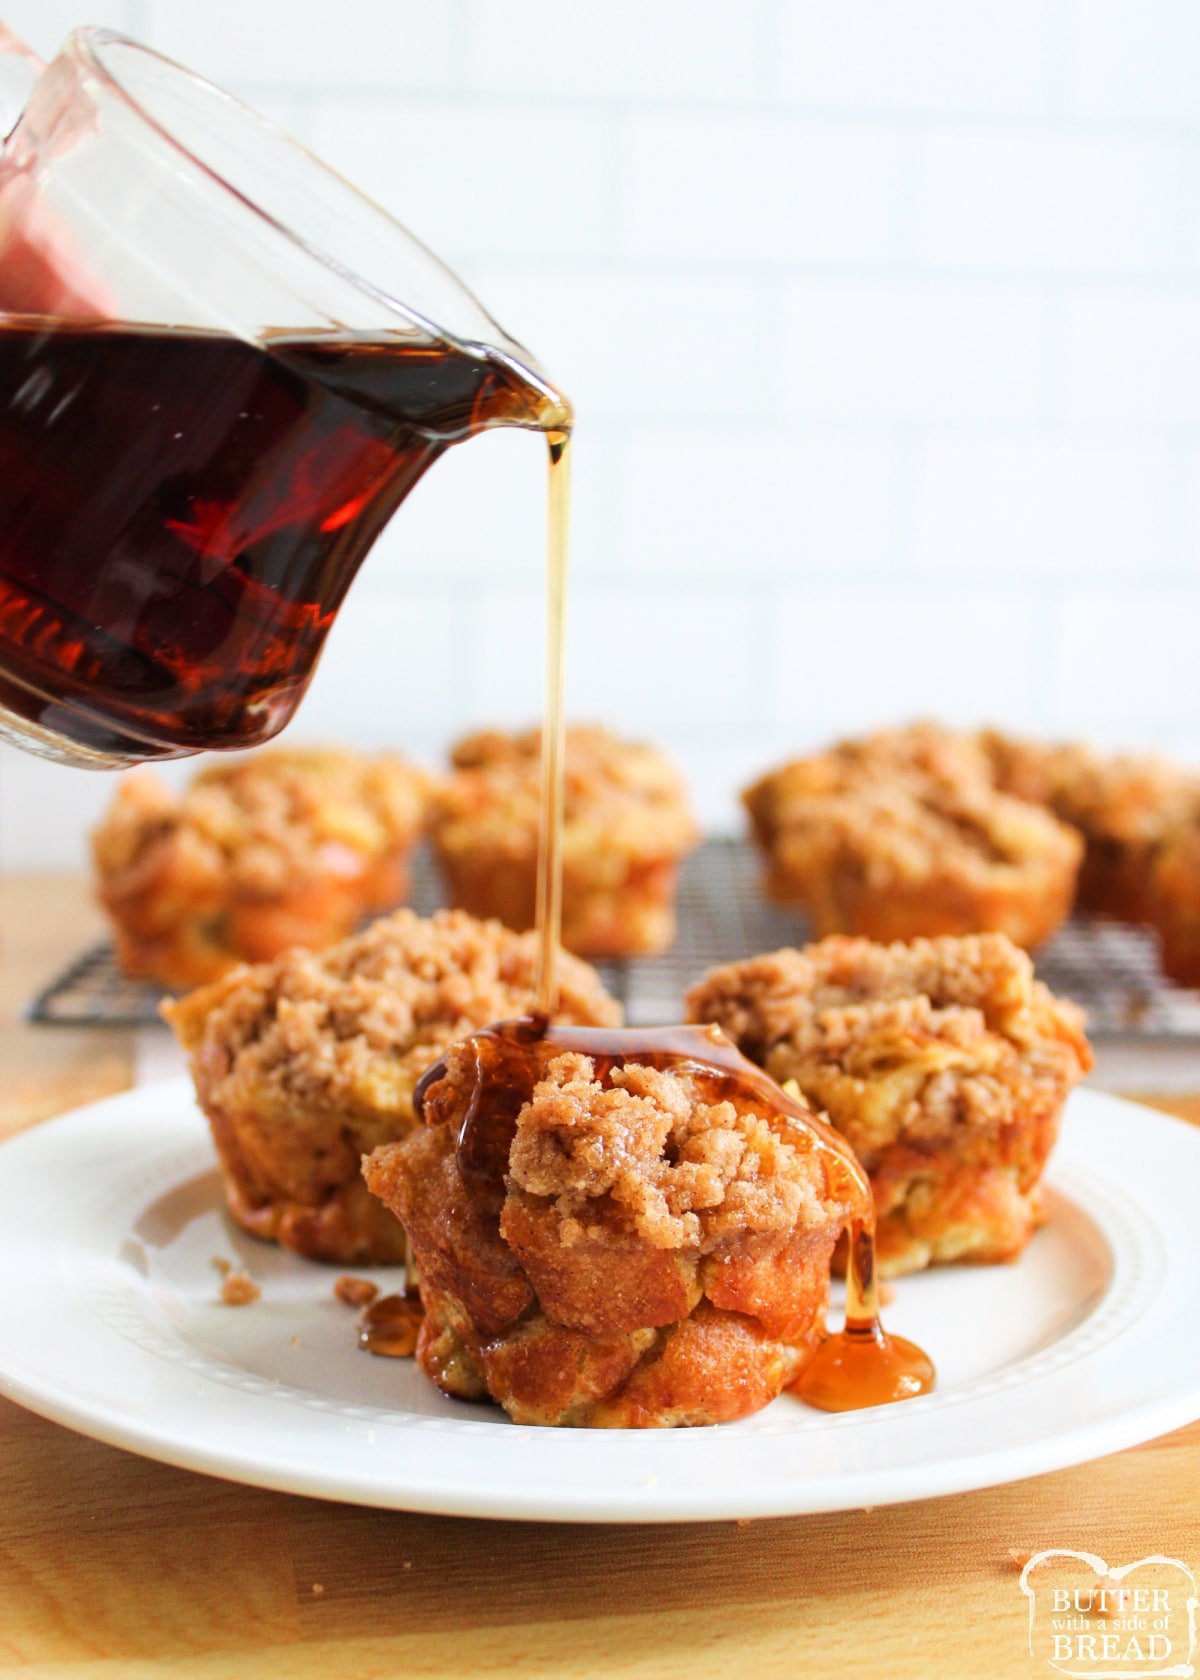 French Toast Muffins made with sourdough bread, milk and eggs and then topped with a simple cinnamon sugar streusel. Perfectly portioned servings of french toast baked in a muffin tin!